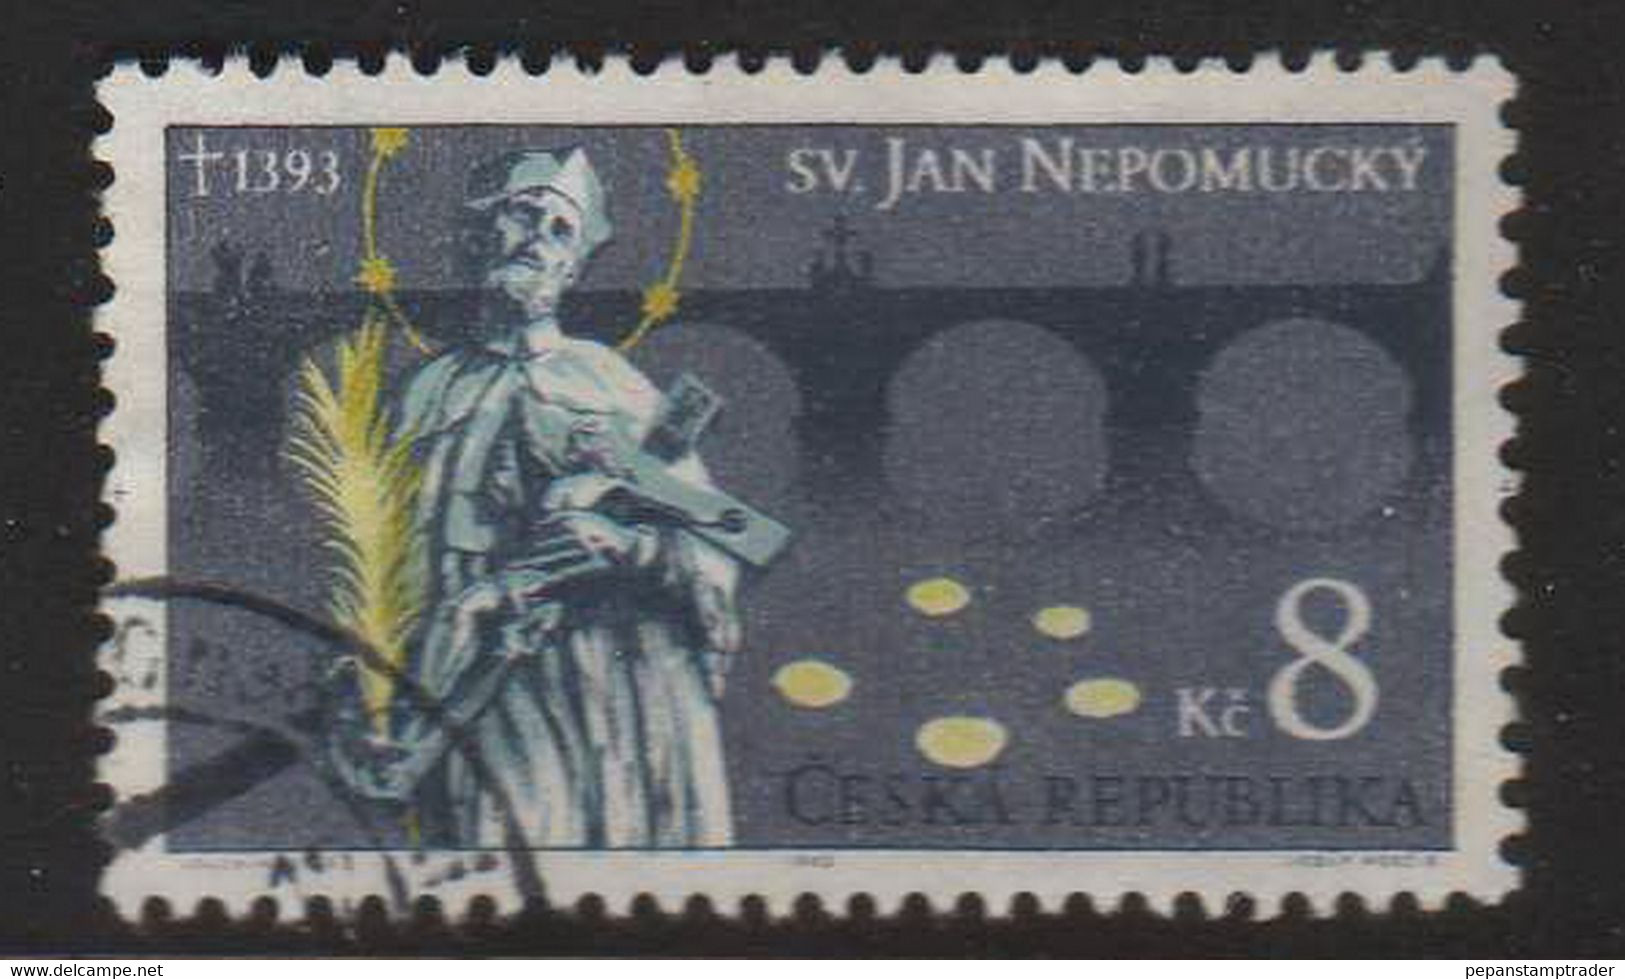 Czech Rep. - #2880 - Used - Used Stamps